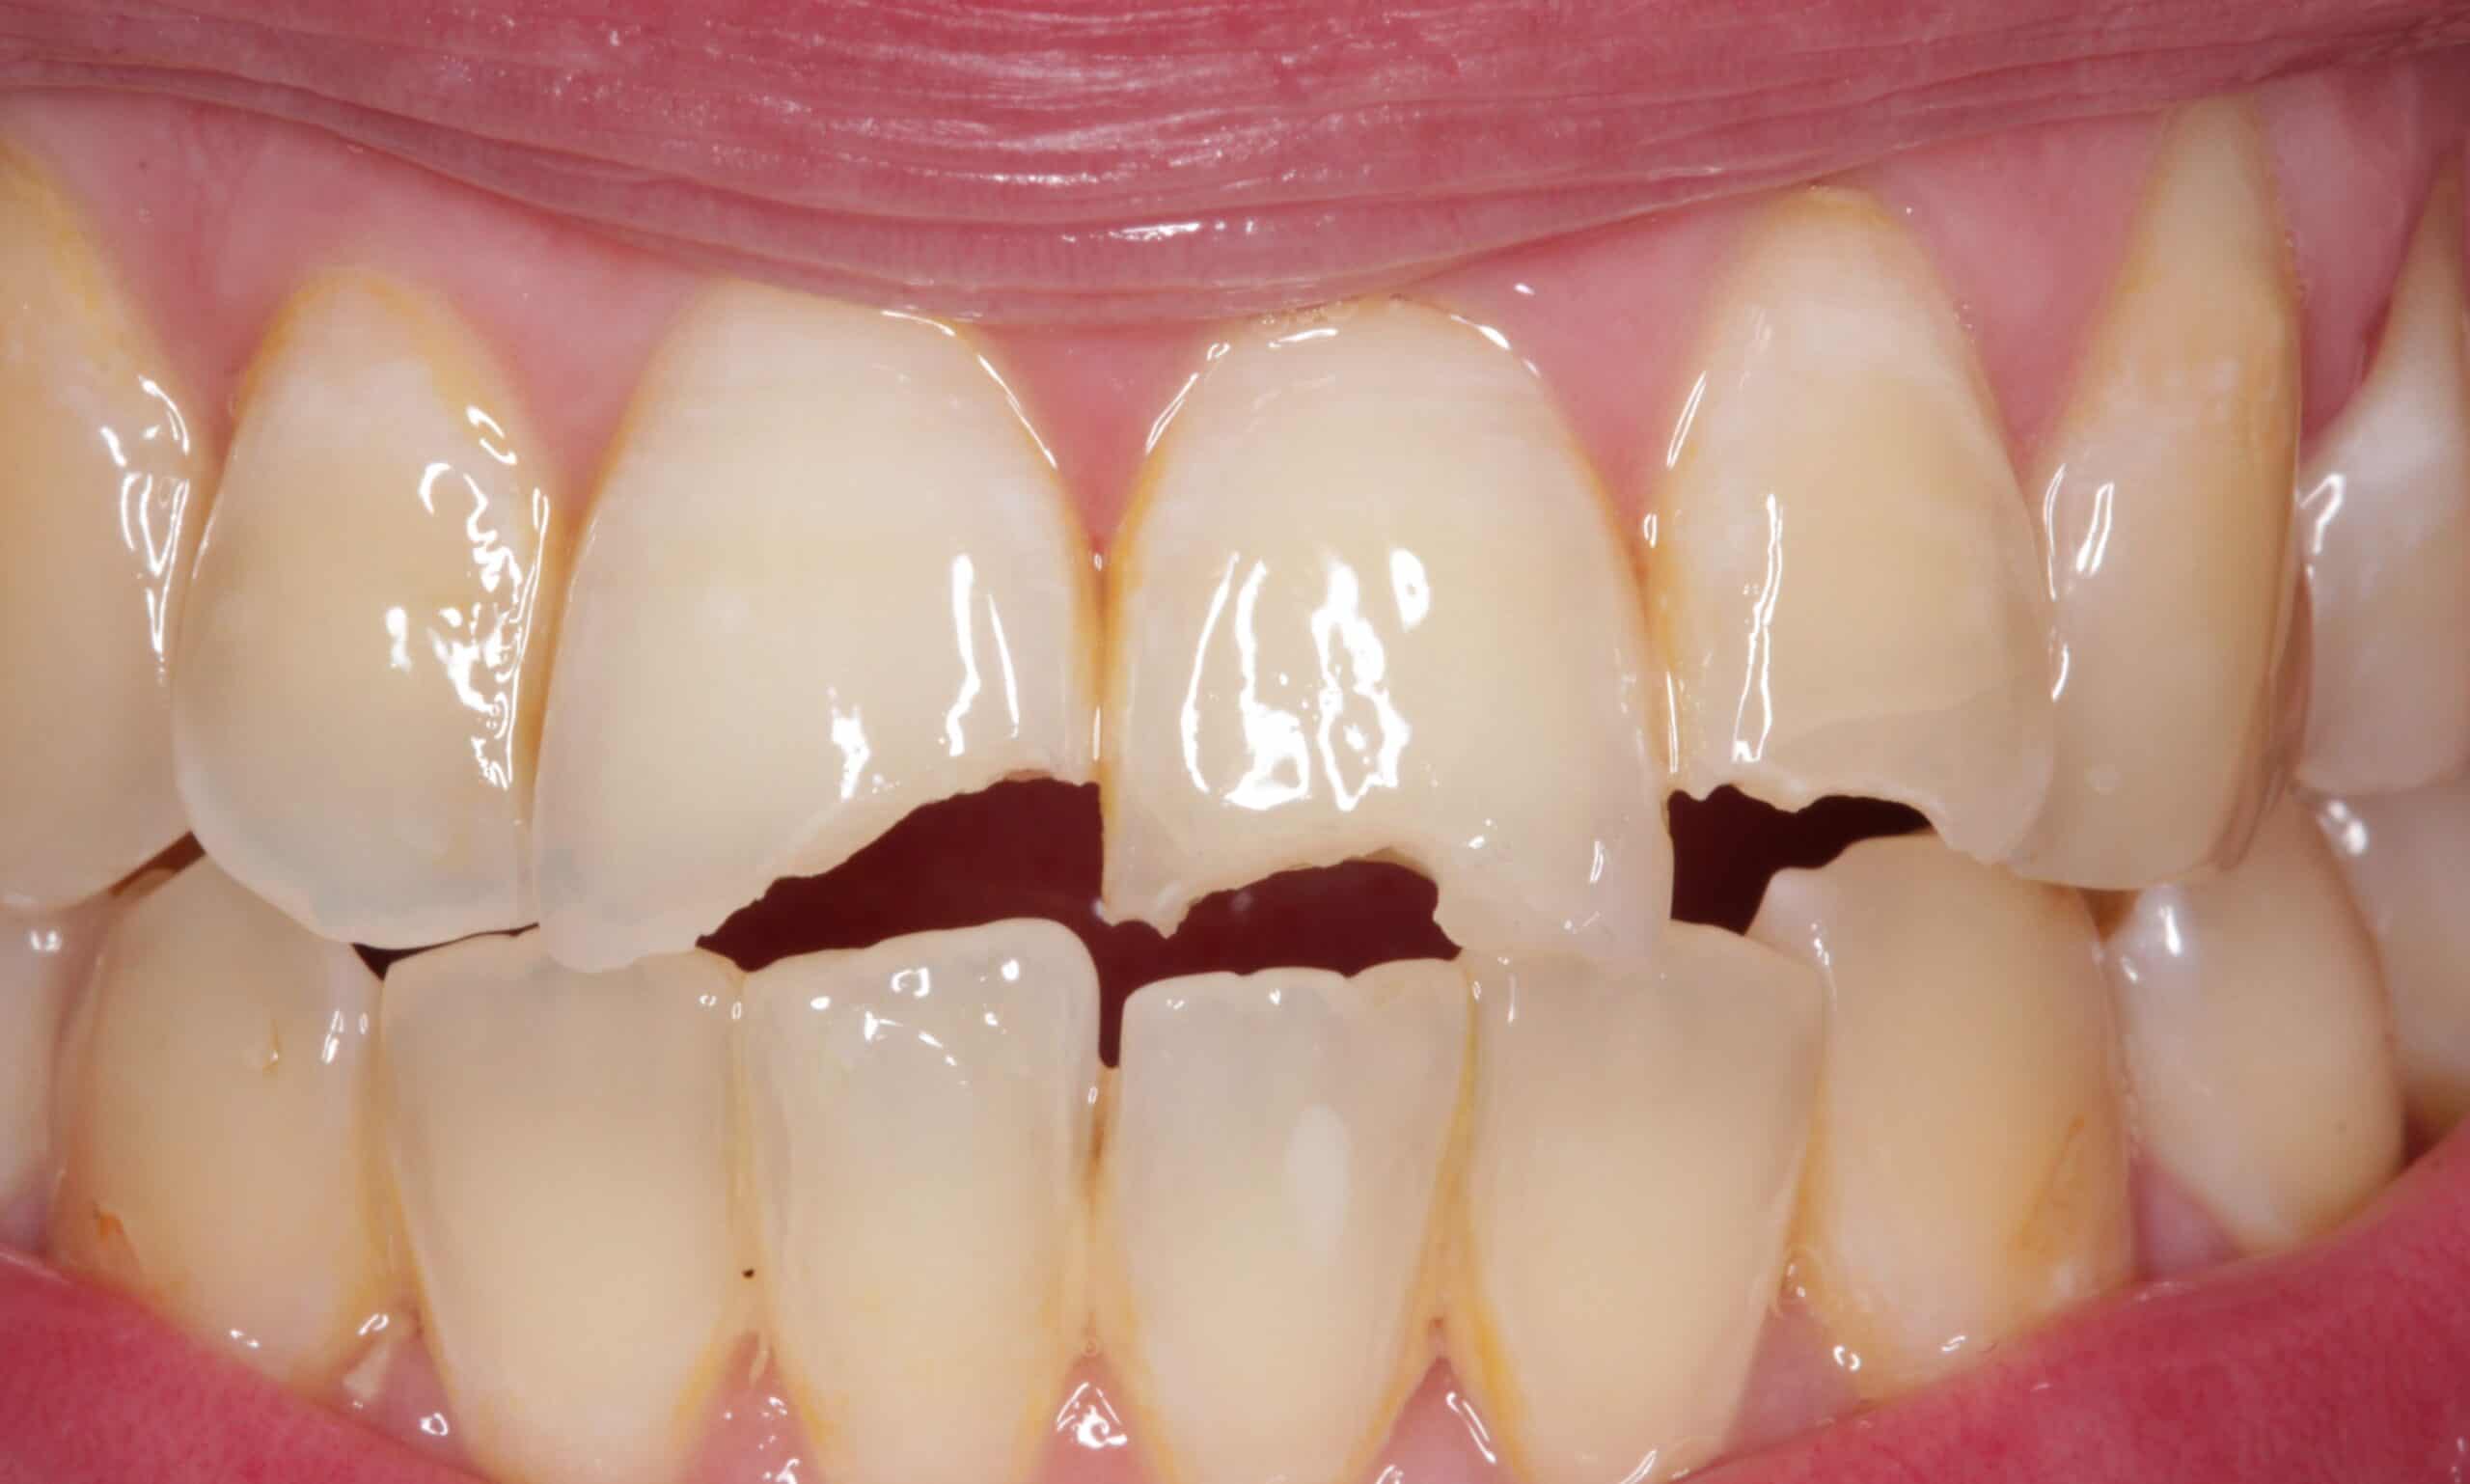 Fractured-teeth-due-to-trauma-before-composite-bonding-scaled